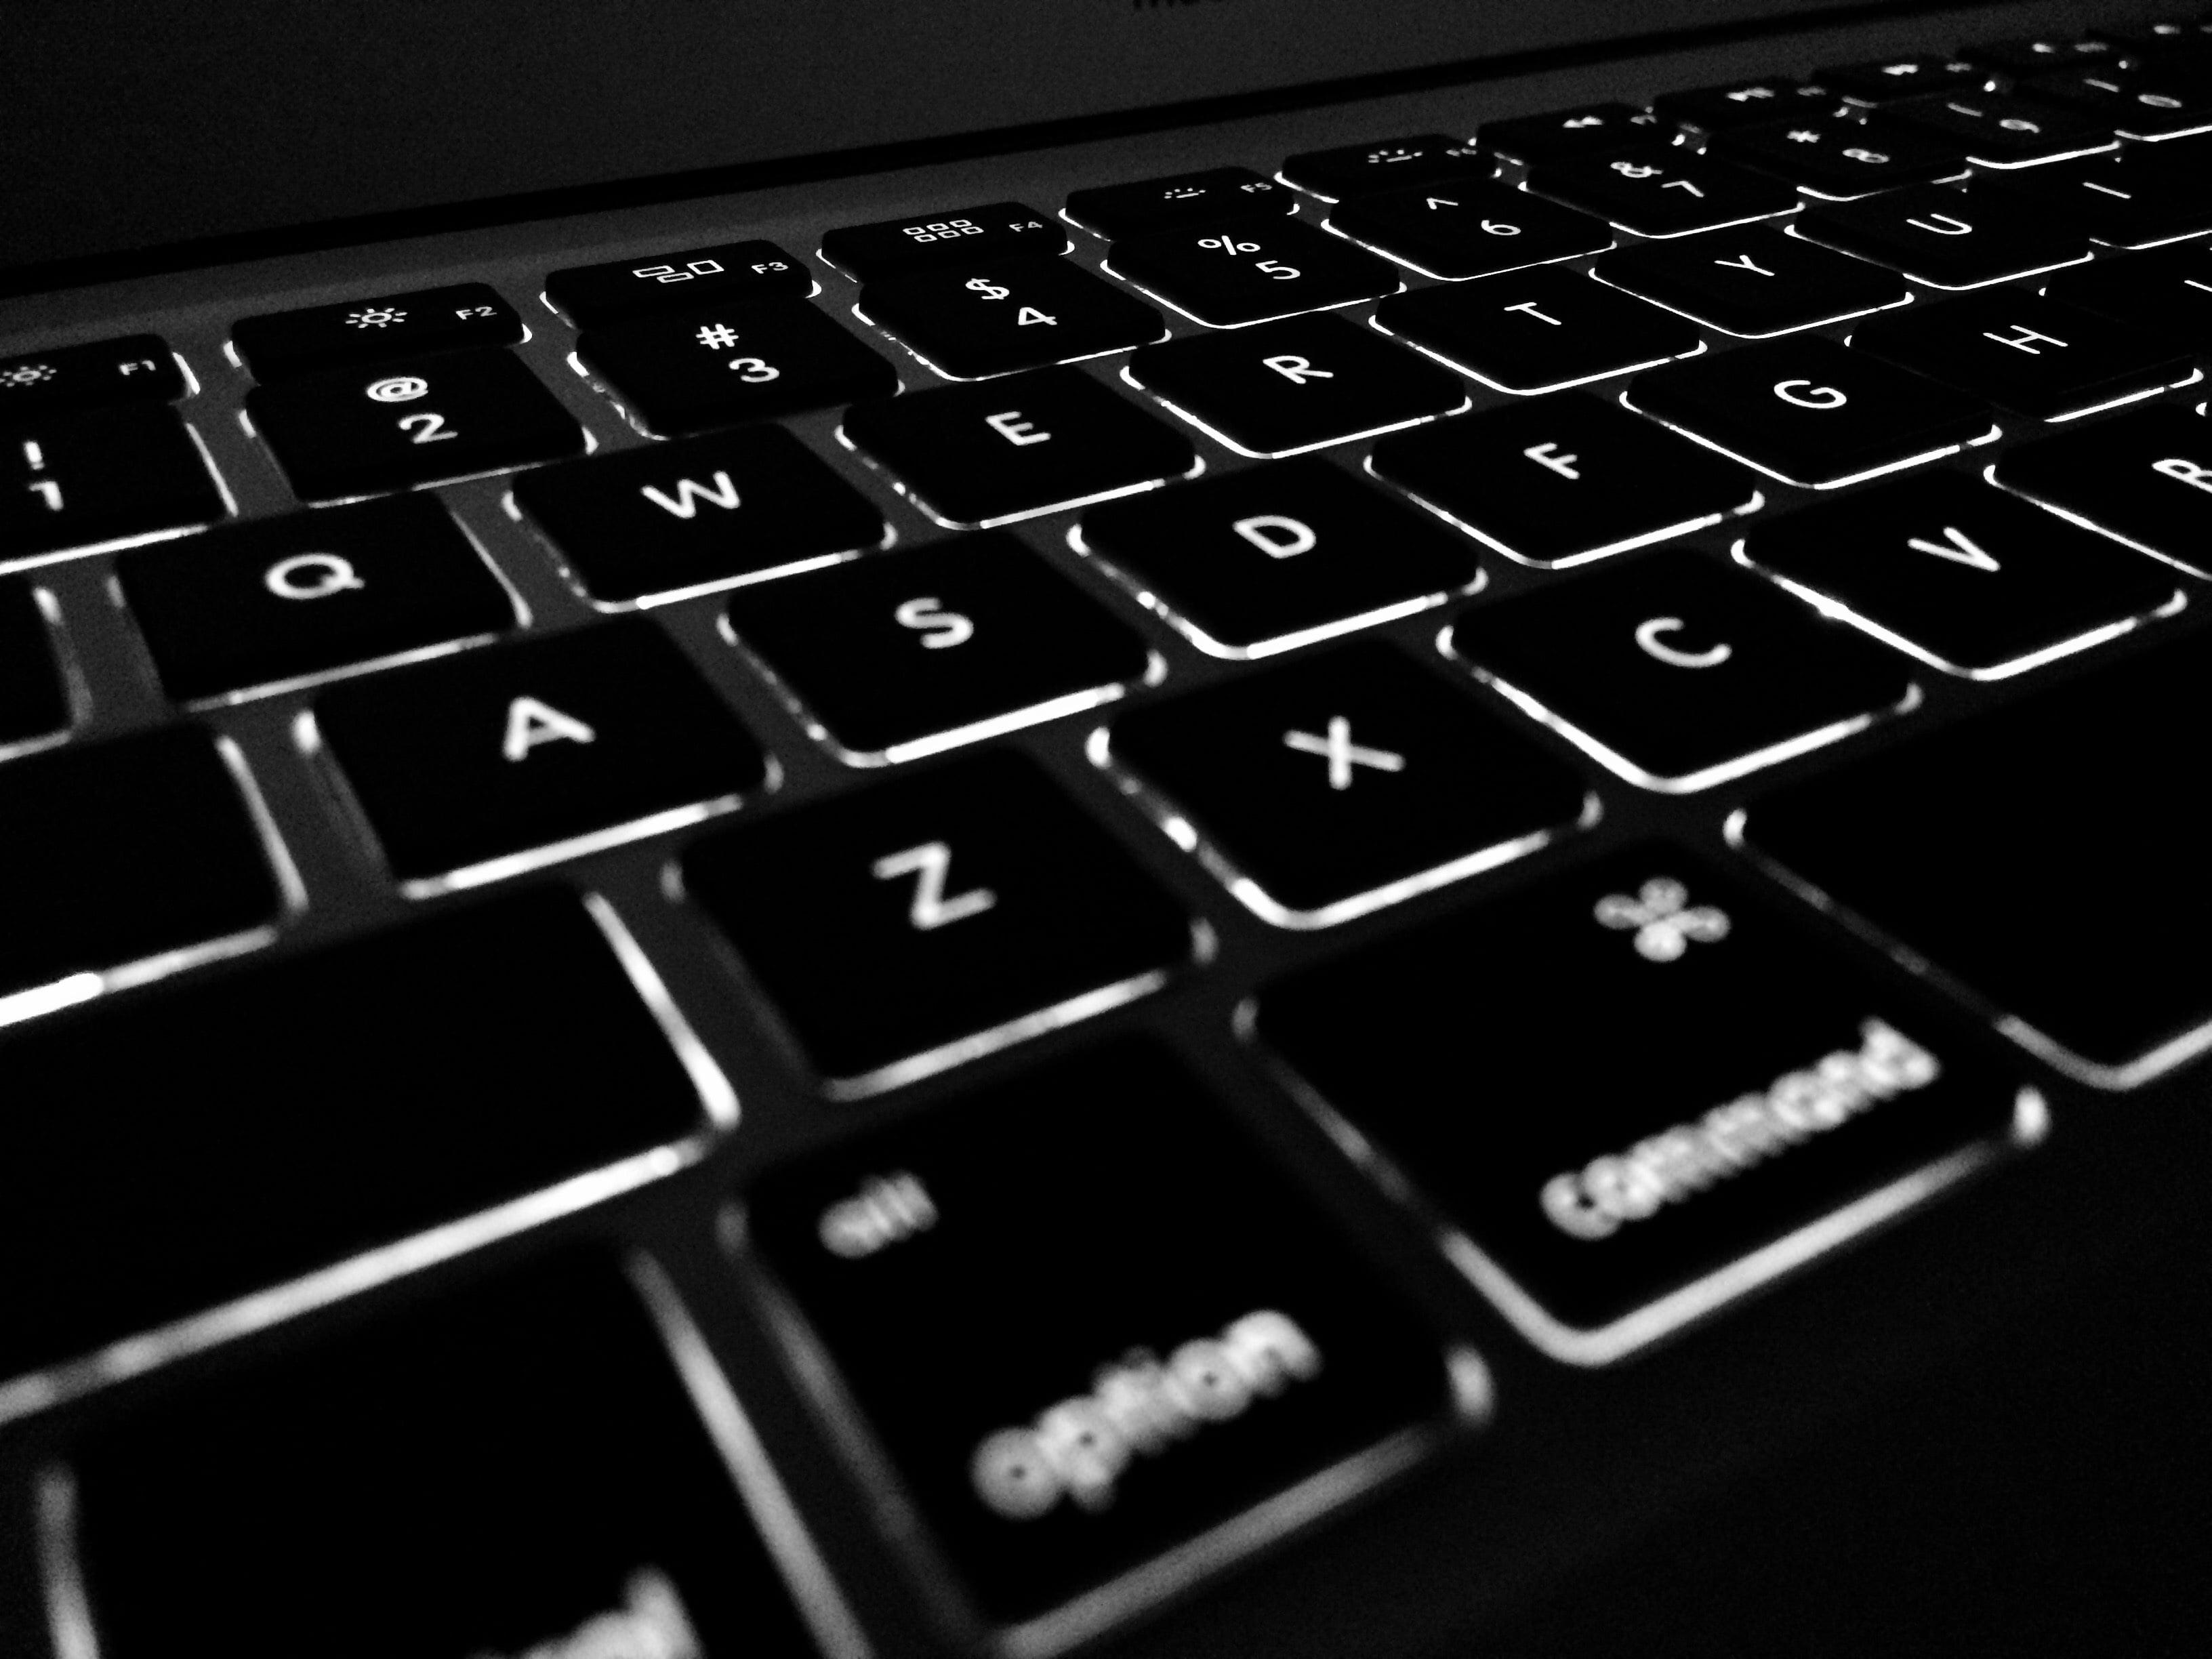 Keyboard Background Hd Wallpaper for Desktop and Mobiles - Wallpapers.net